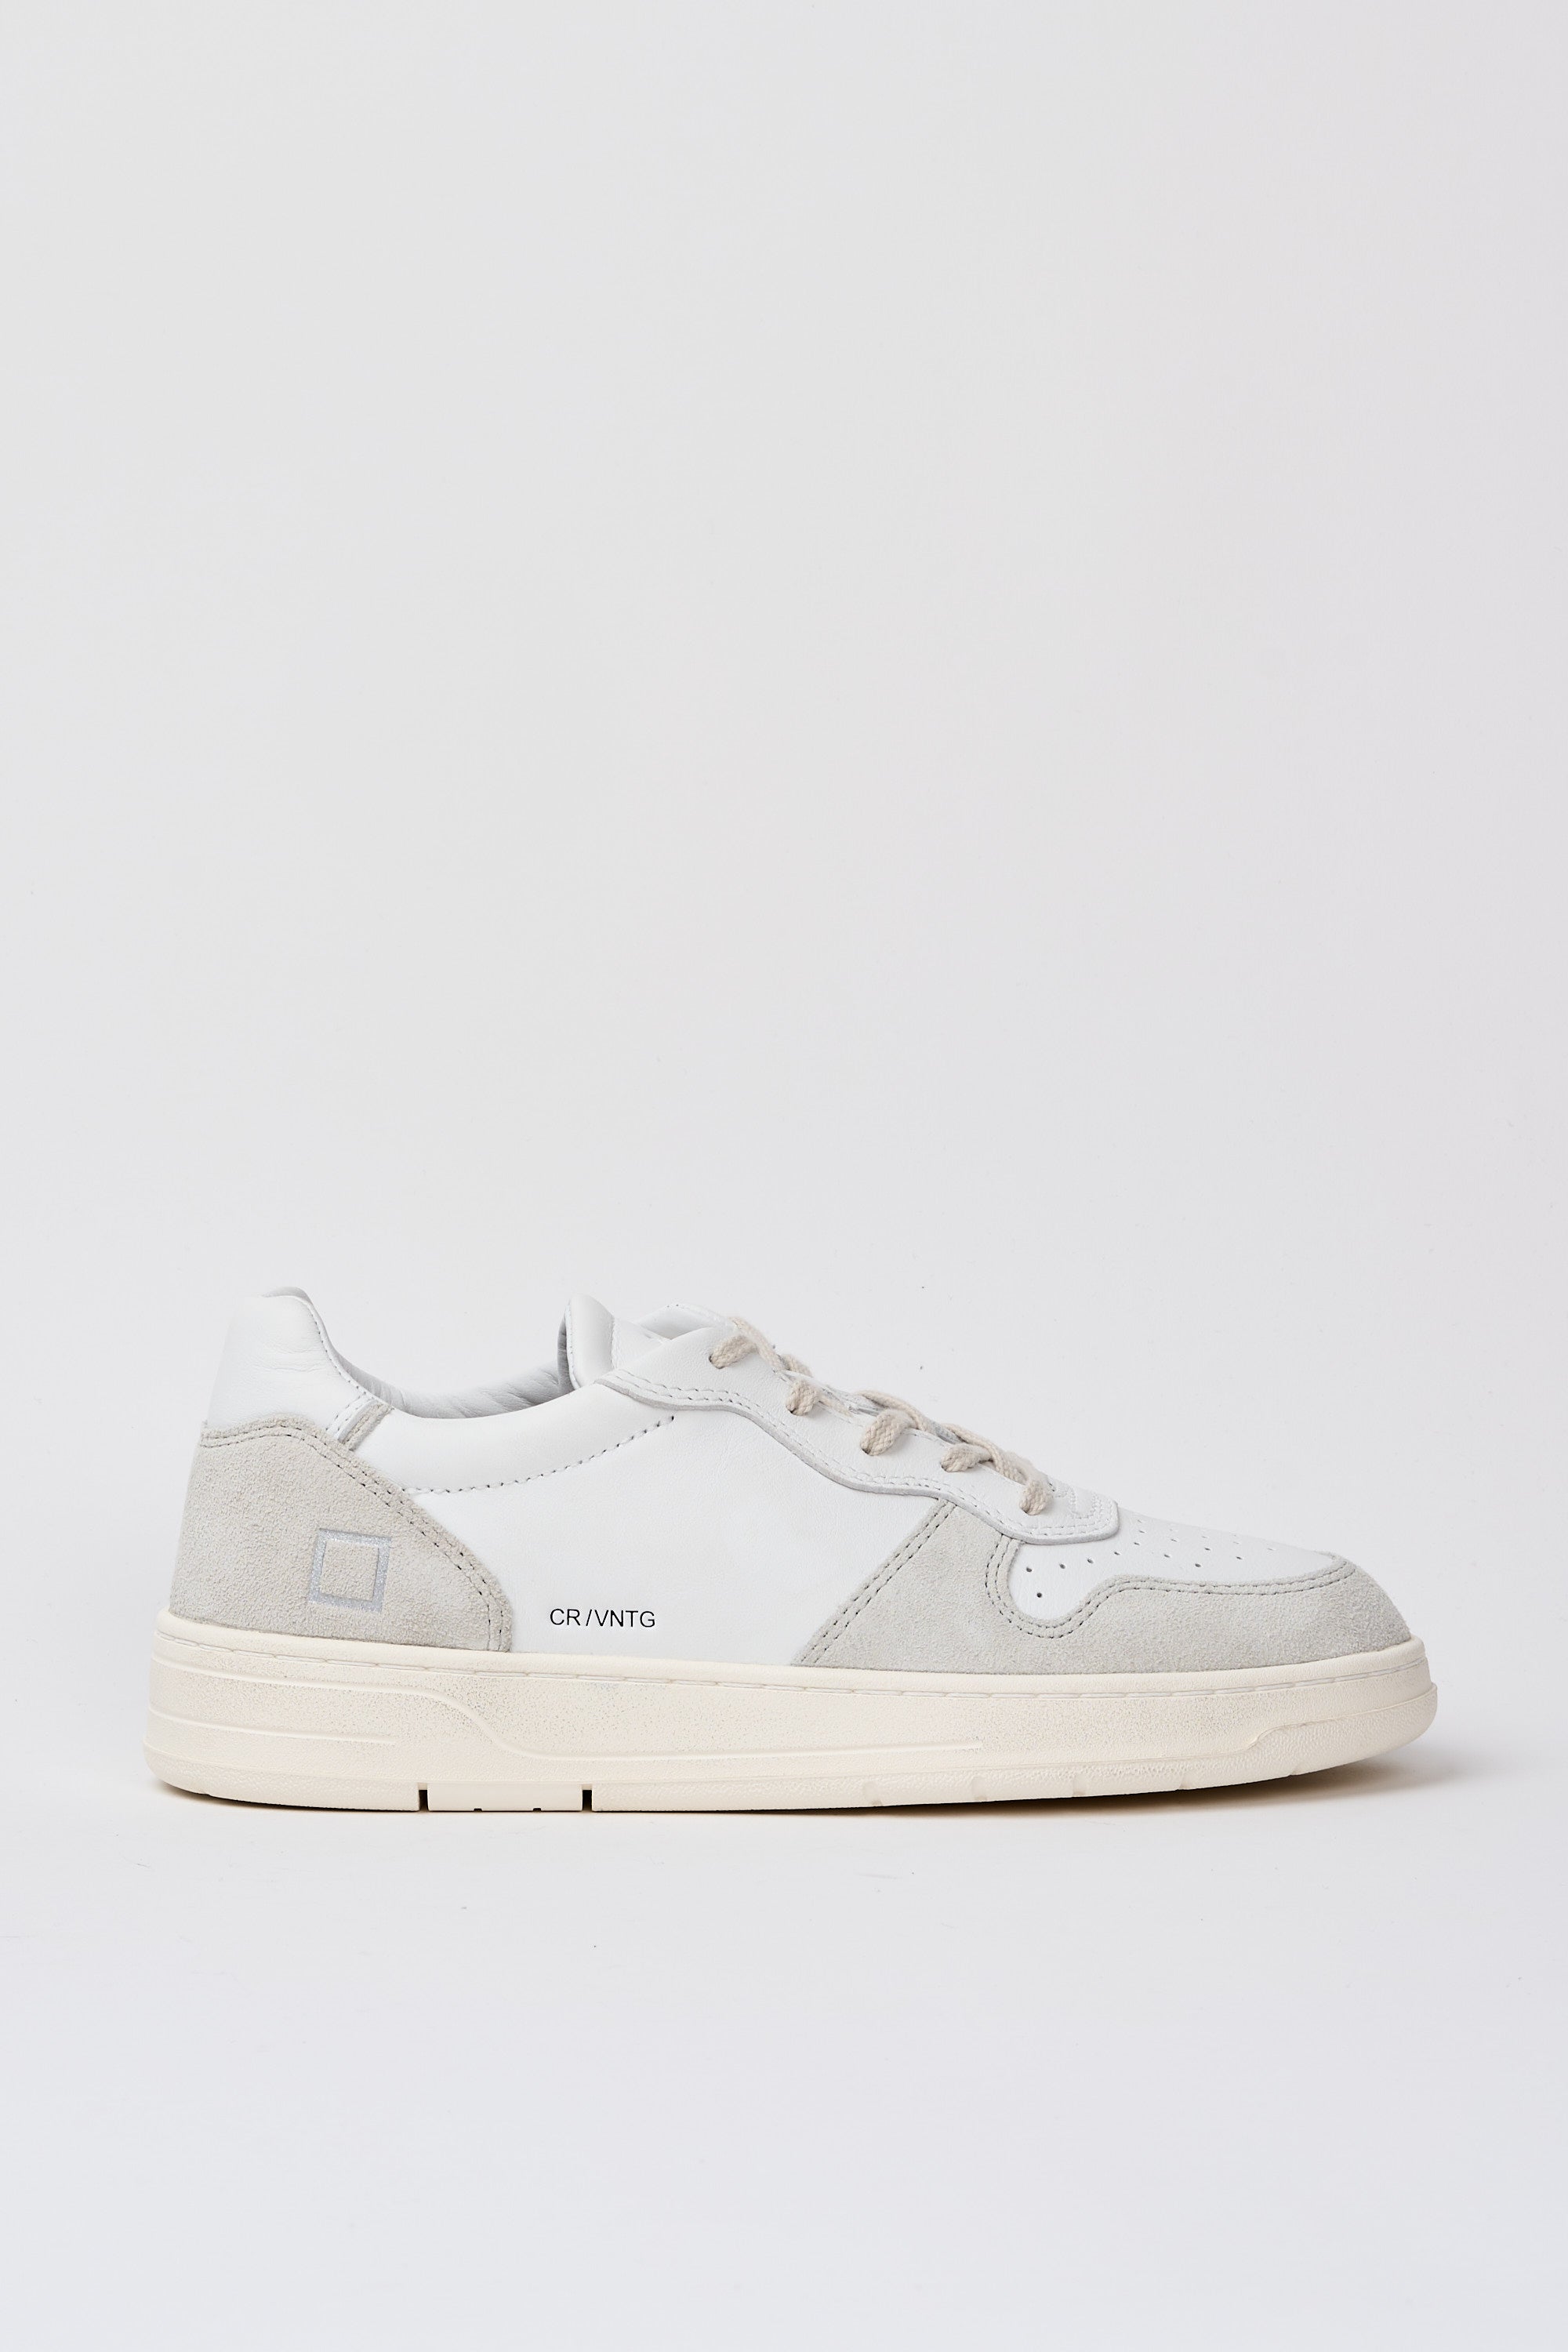 D.A.T.E. Court Vintage Leather/Suede White Sneakers-1